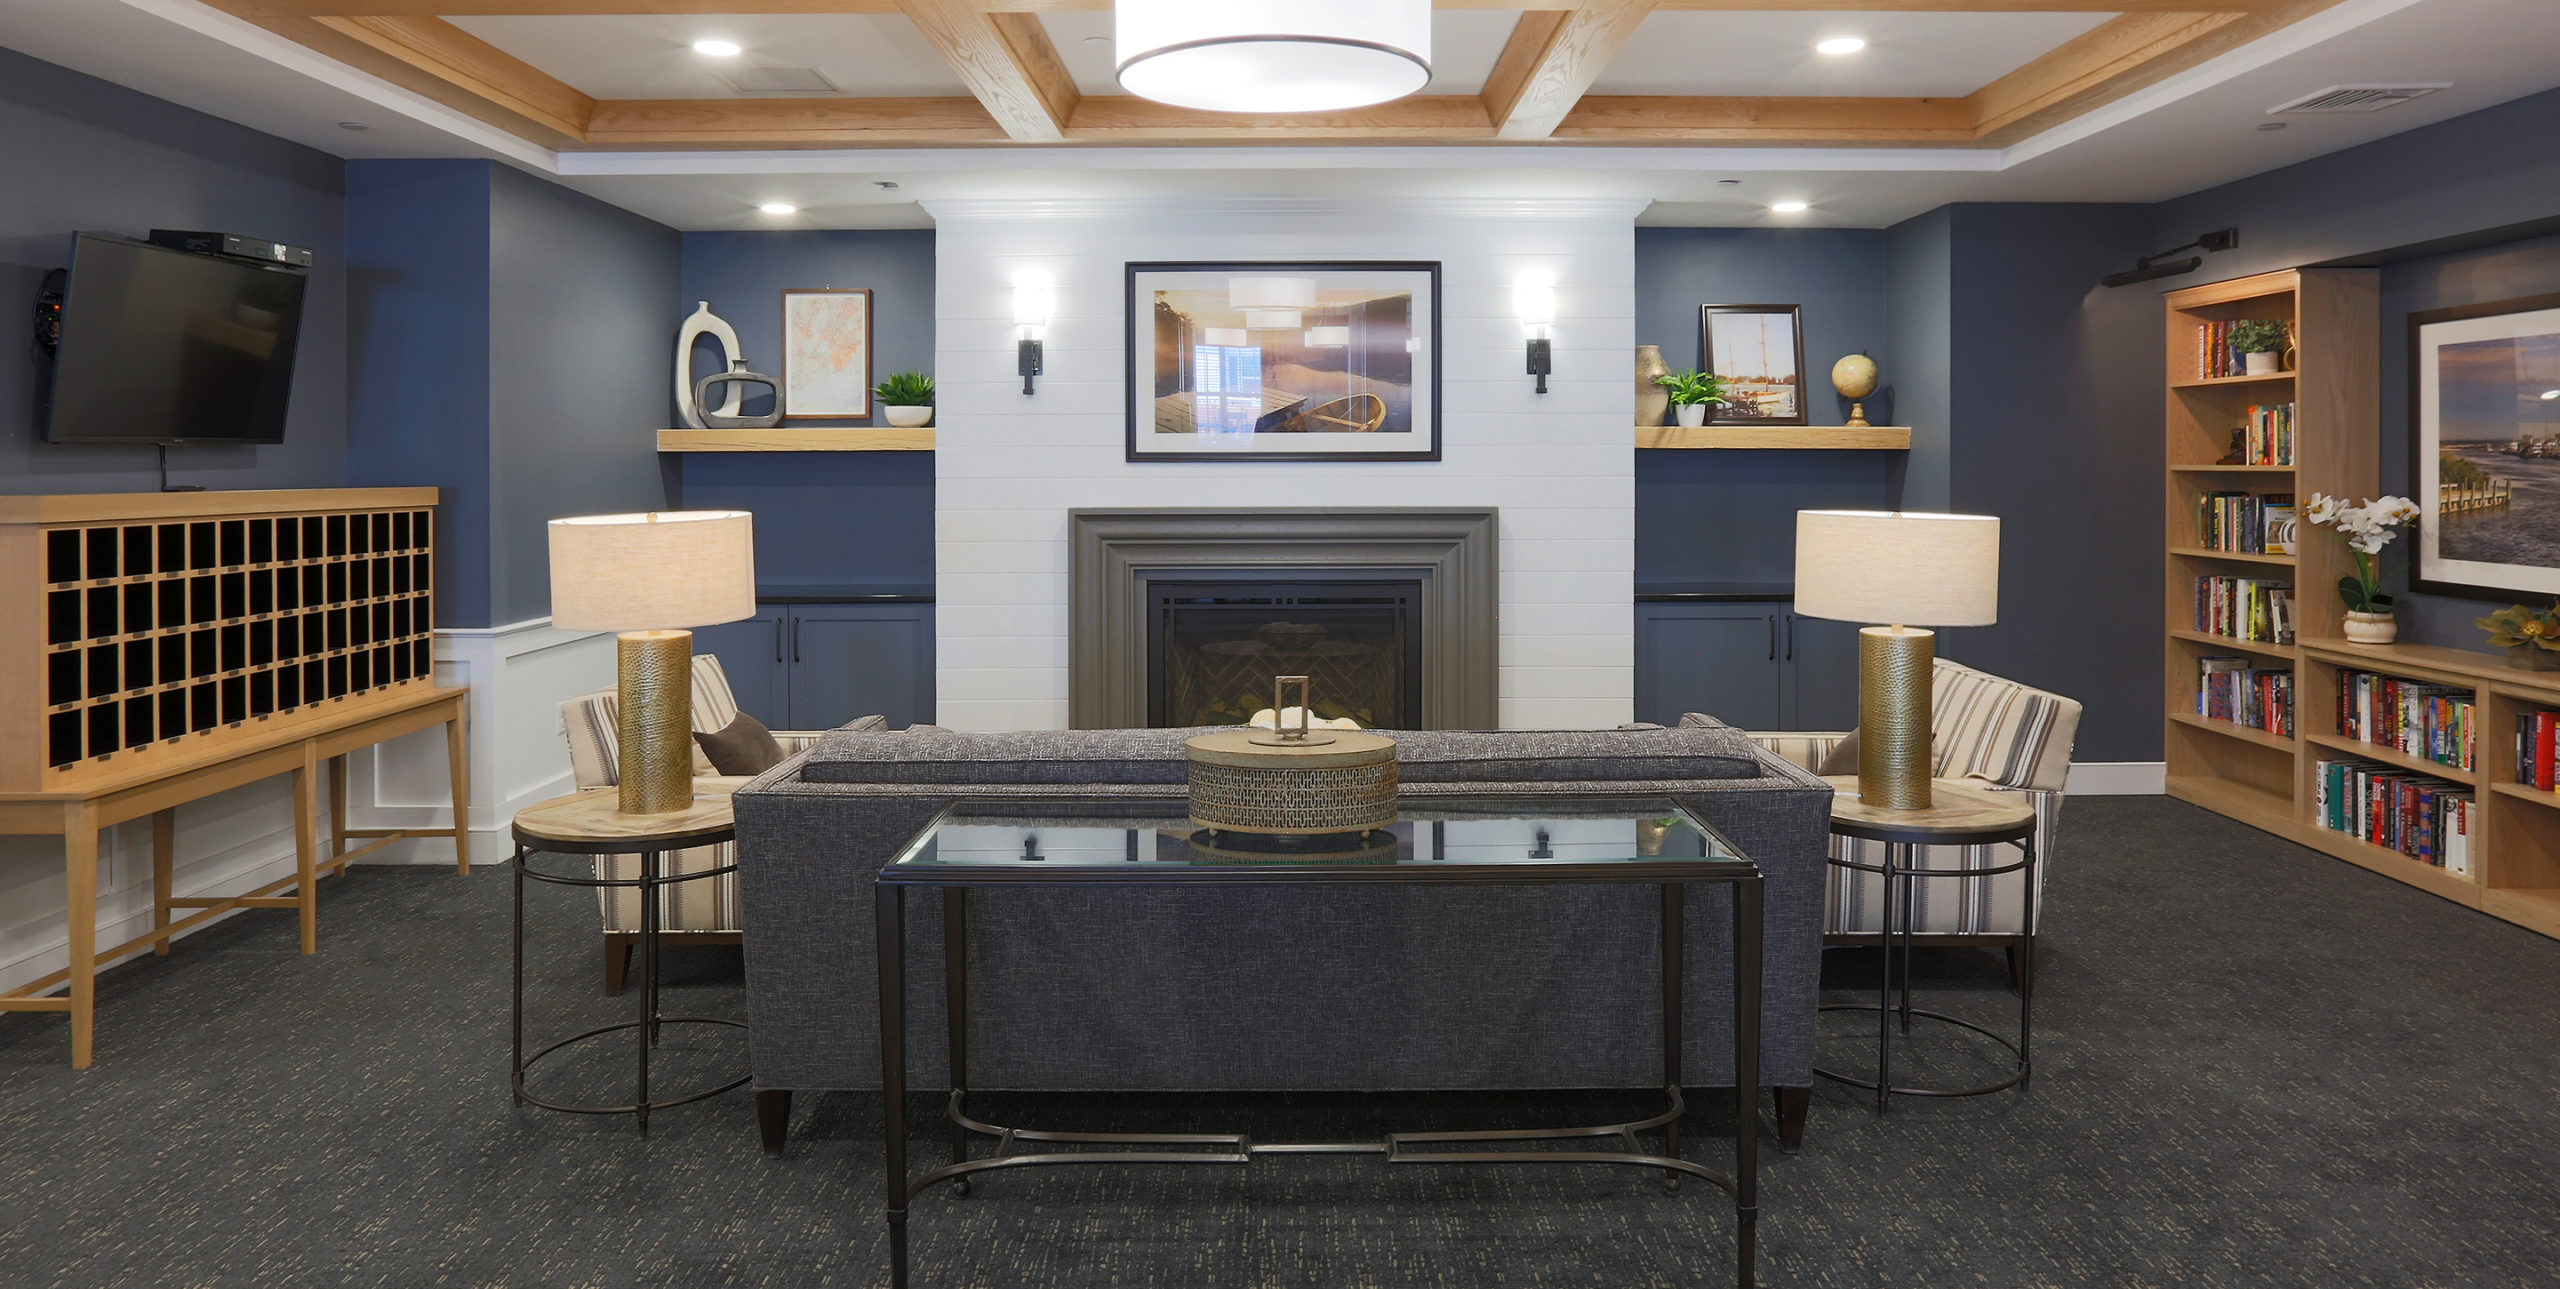 Cozy common area of three couches, two book shelves, a television and a fireplace at Brightview Senior Living in Sayville, NY